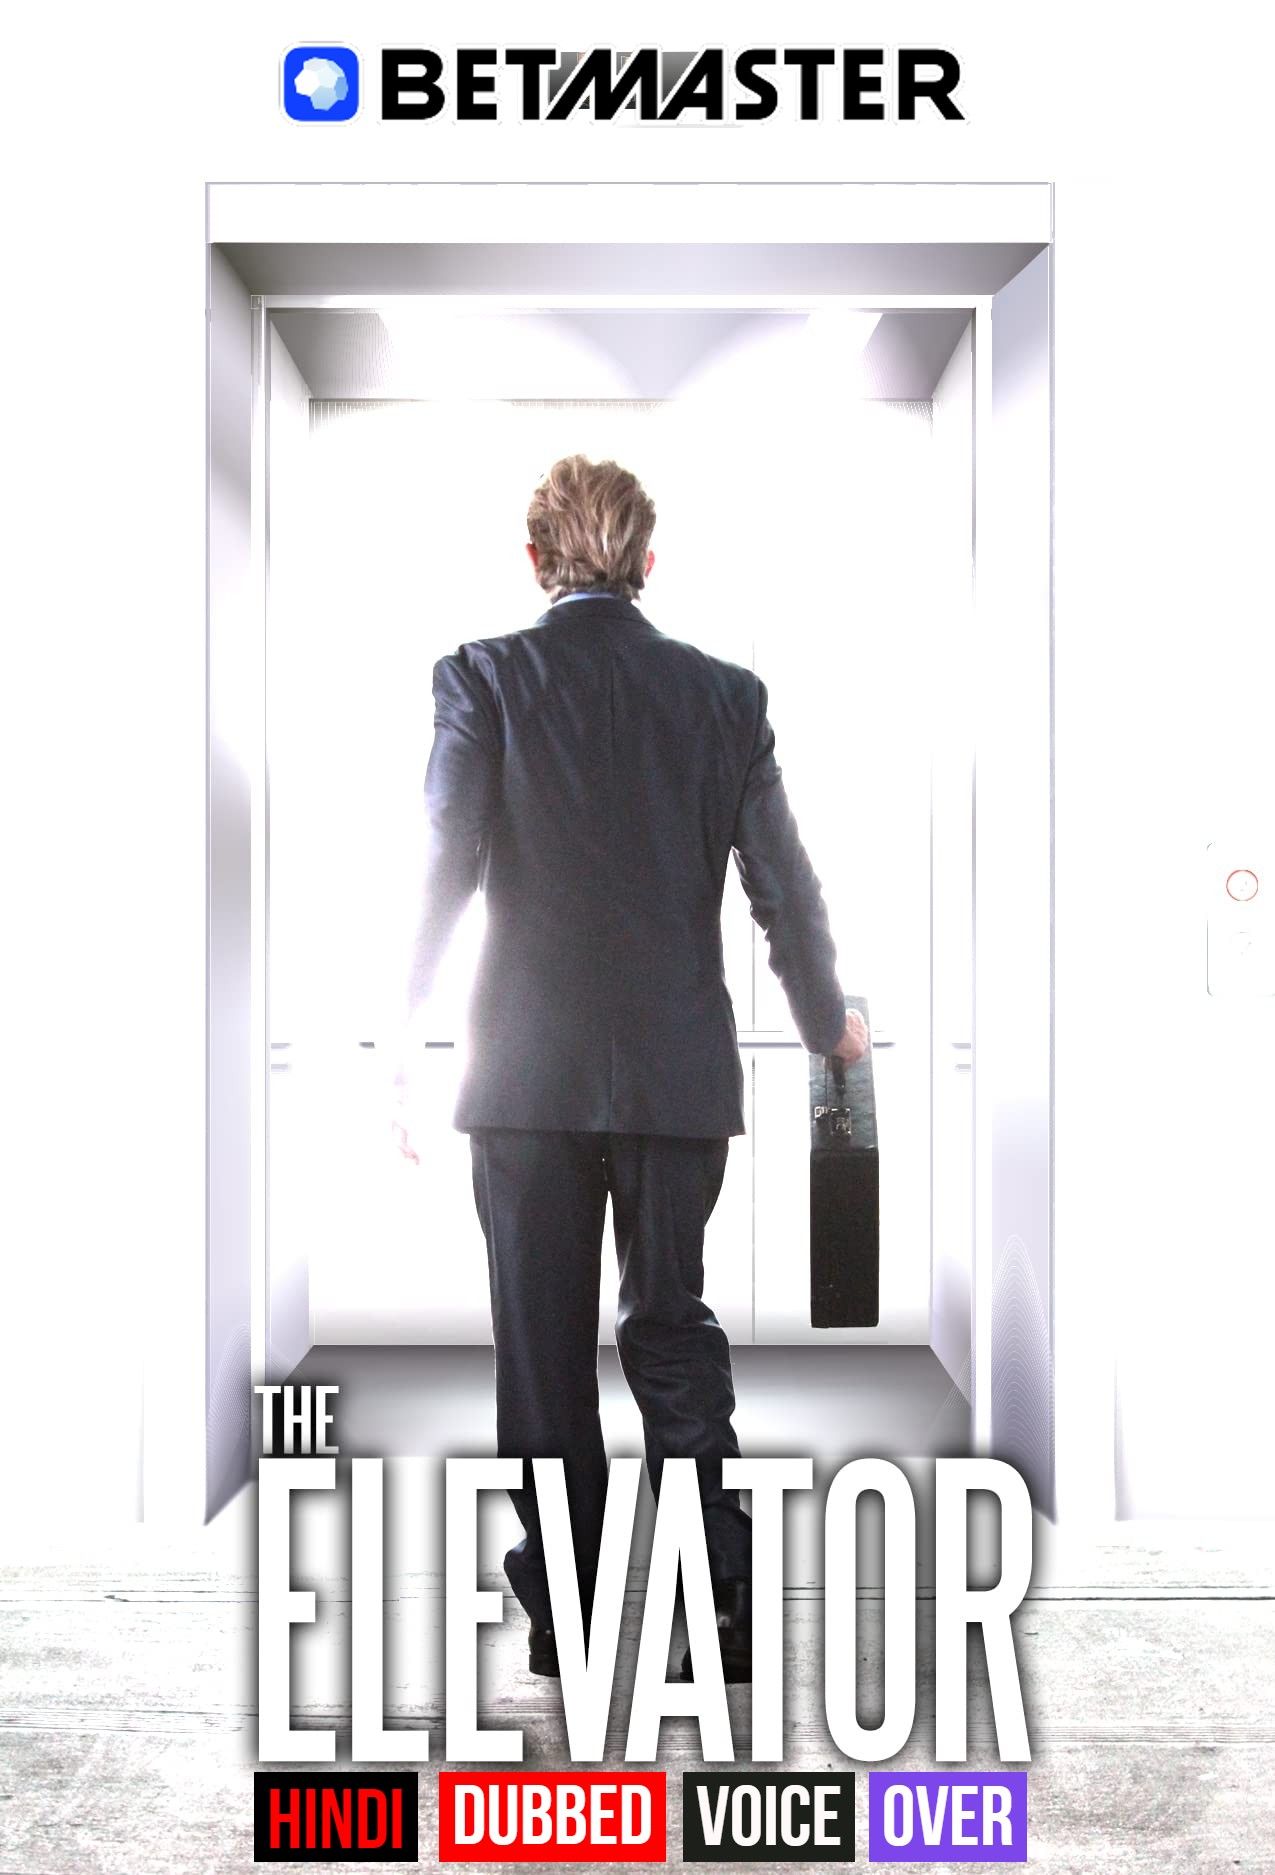 The Elevator (2021) Hindi (Voice Over) Dubbed WEBRip download full movie